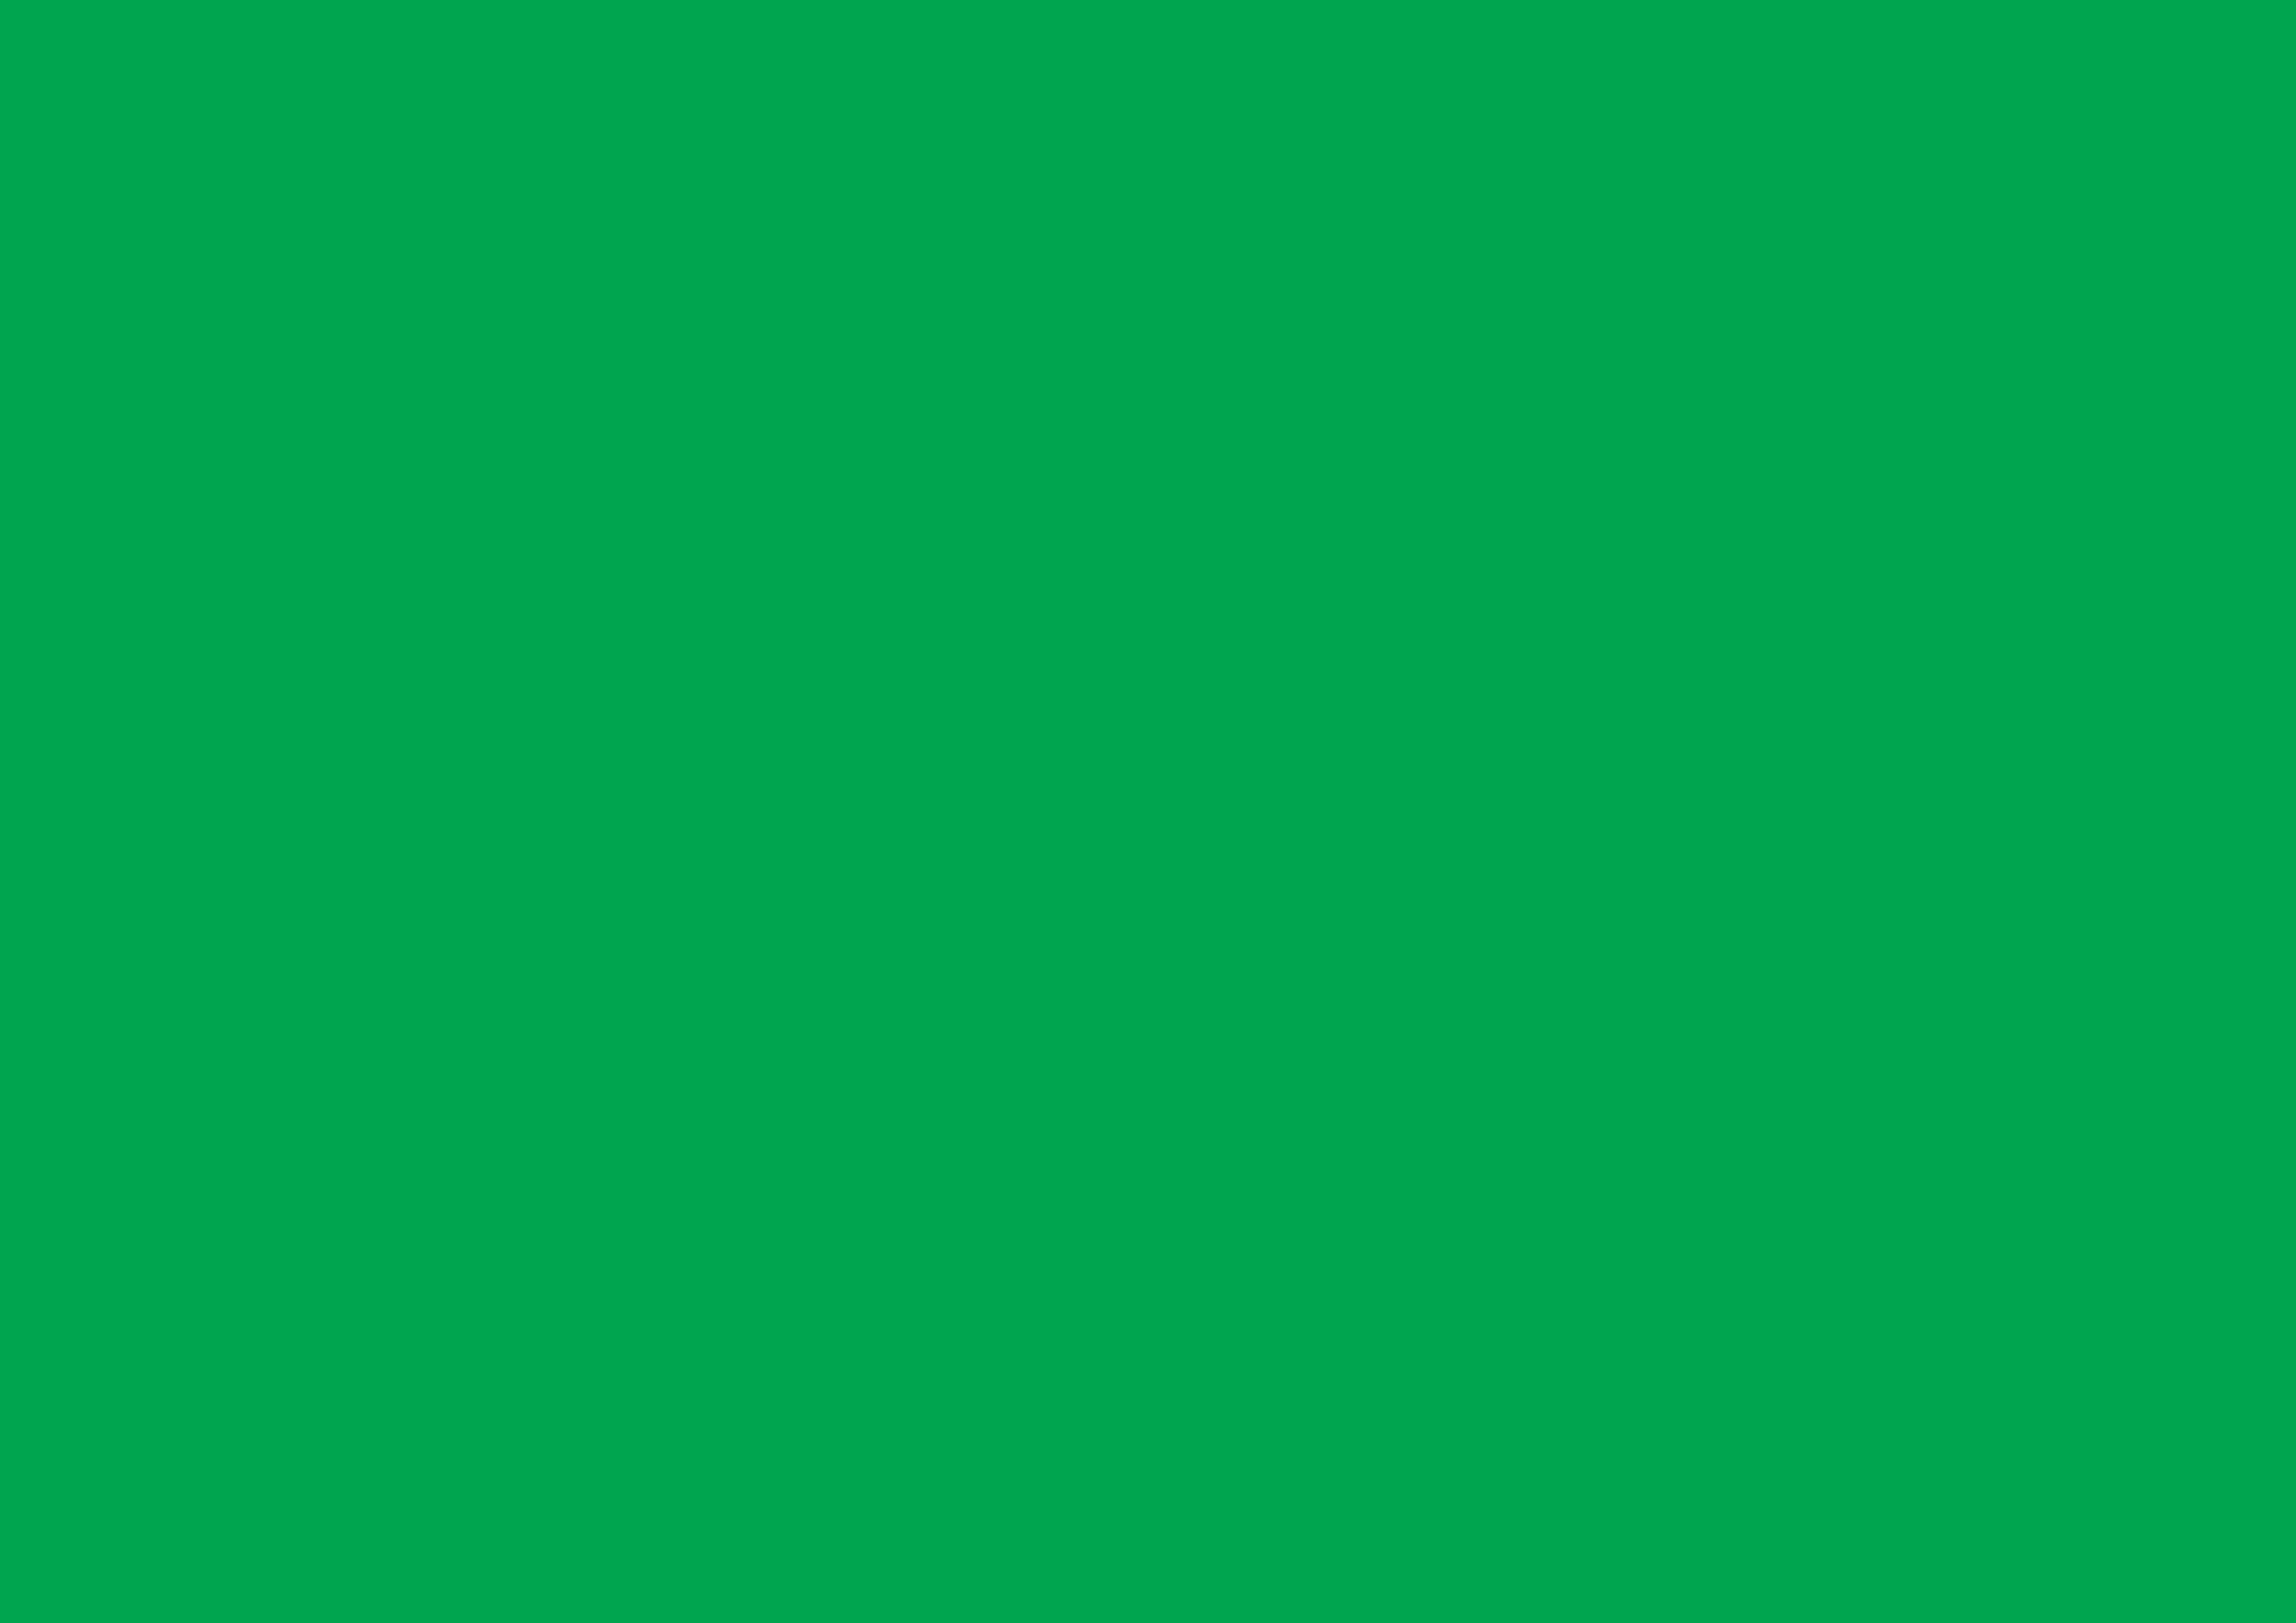 3508x2480 Green Pigment Solid Color Background